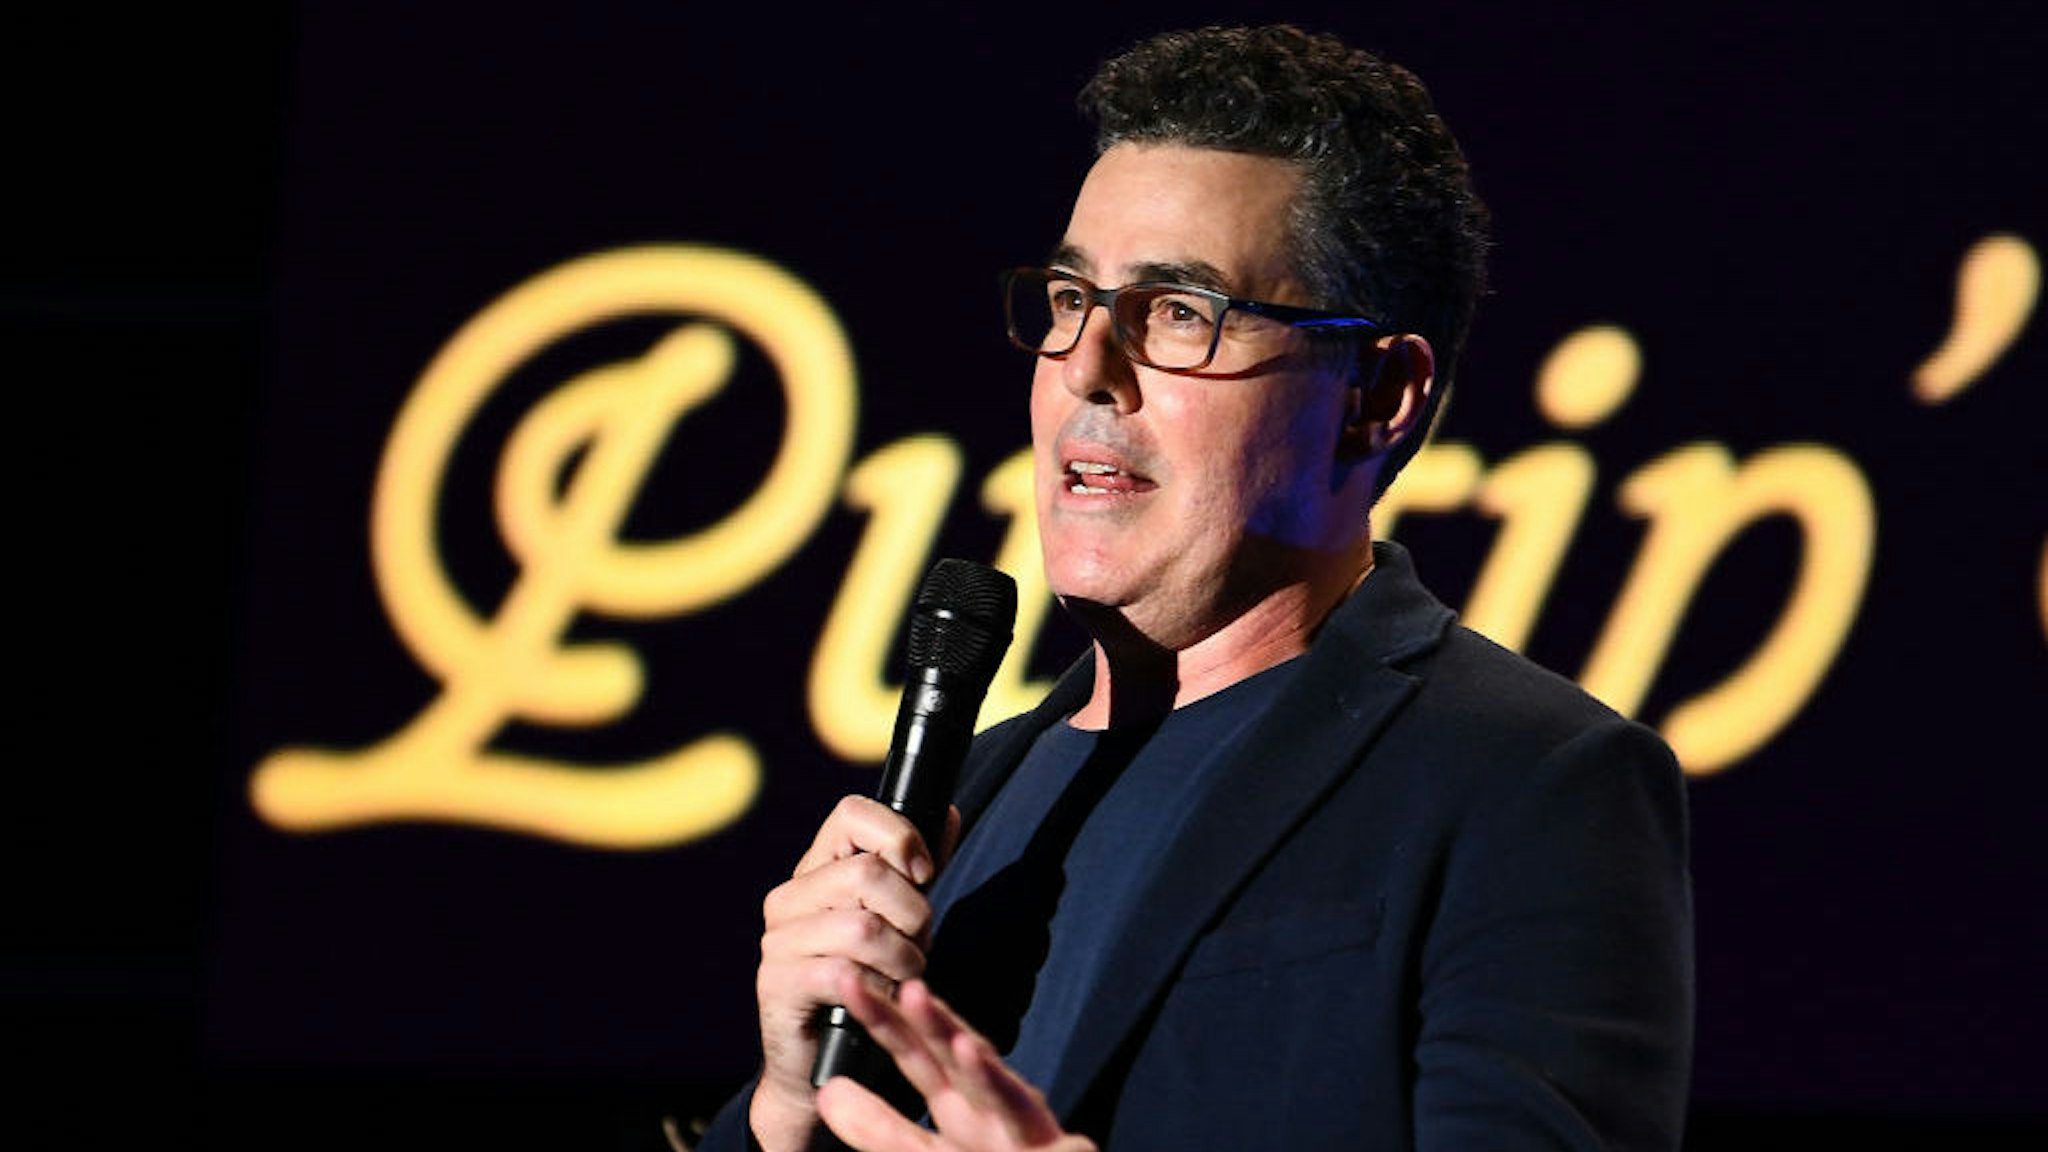 BEVERLY HILLS, CALIFORNIA - OCTOBER 17: Adam Carolla performs onstage at the International Myeloma Foundation 13th Annual Comedy Celebration at The Beverly Hilton Hotel on October 17, 2019 in Beverly Hills, California. (Photo by Araya Diaz/Getty Images for International Myeloma Foundation)